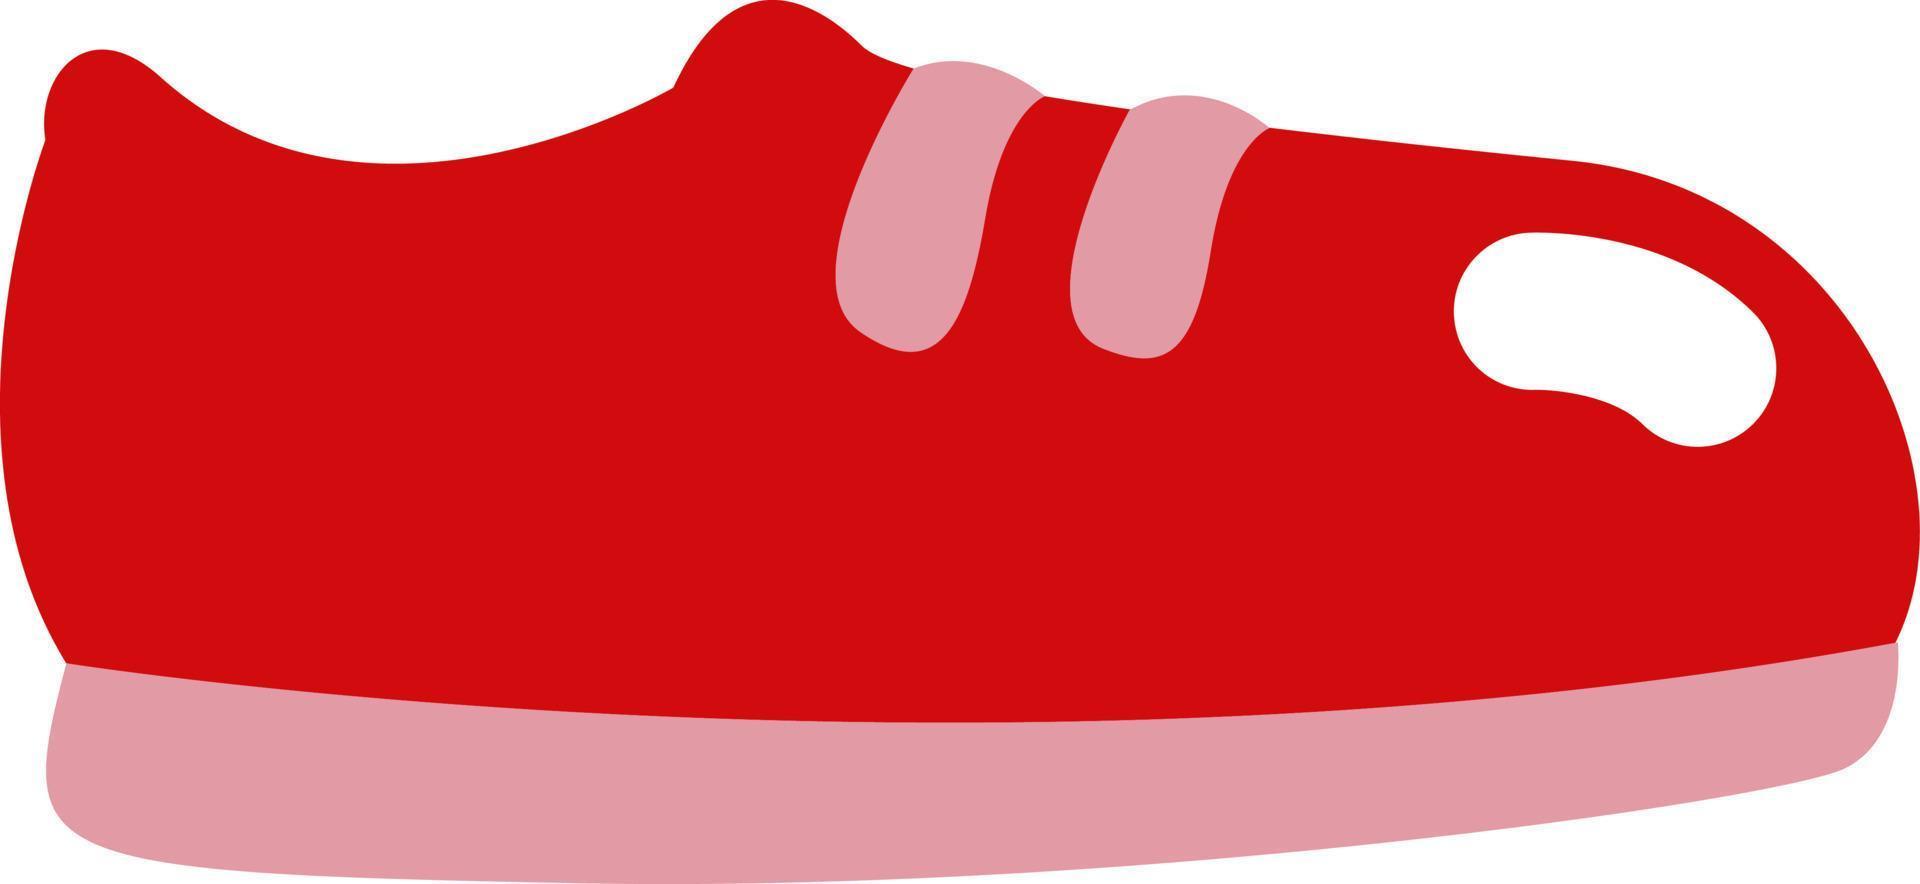 Red running shoes, illustration, vector on a white background.